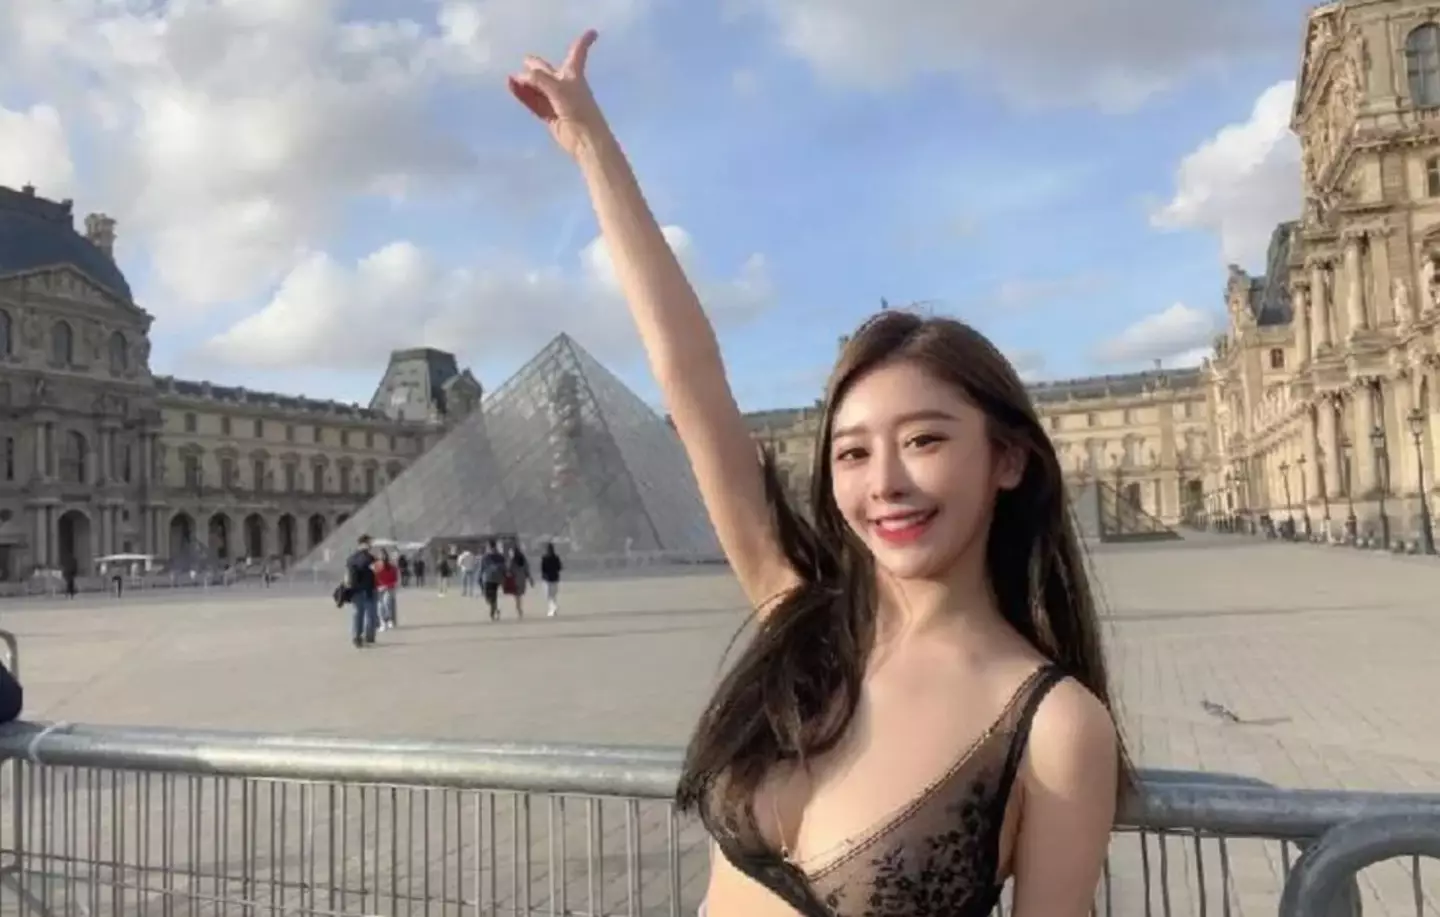 She caused a scene when posing in her bra outside the Louvre museum in Paris, France, in 2022.